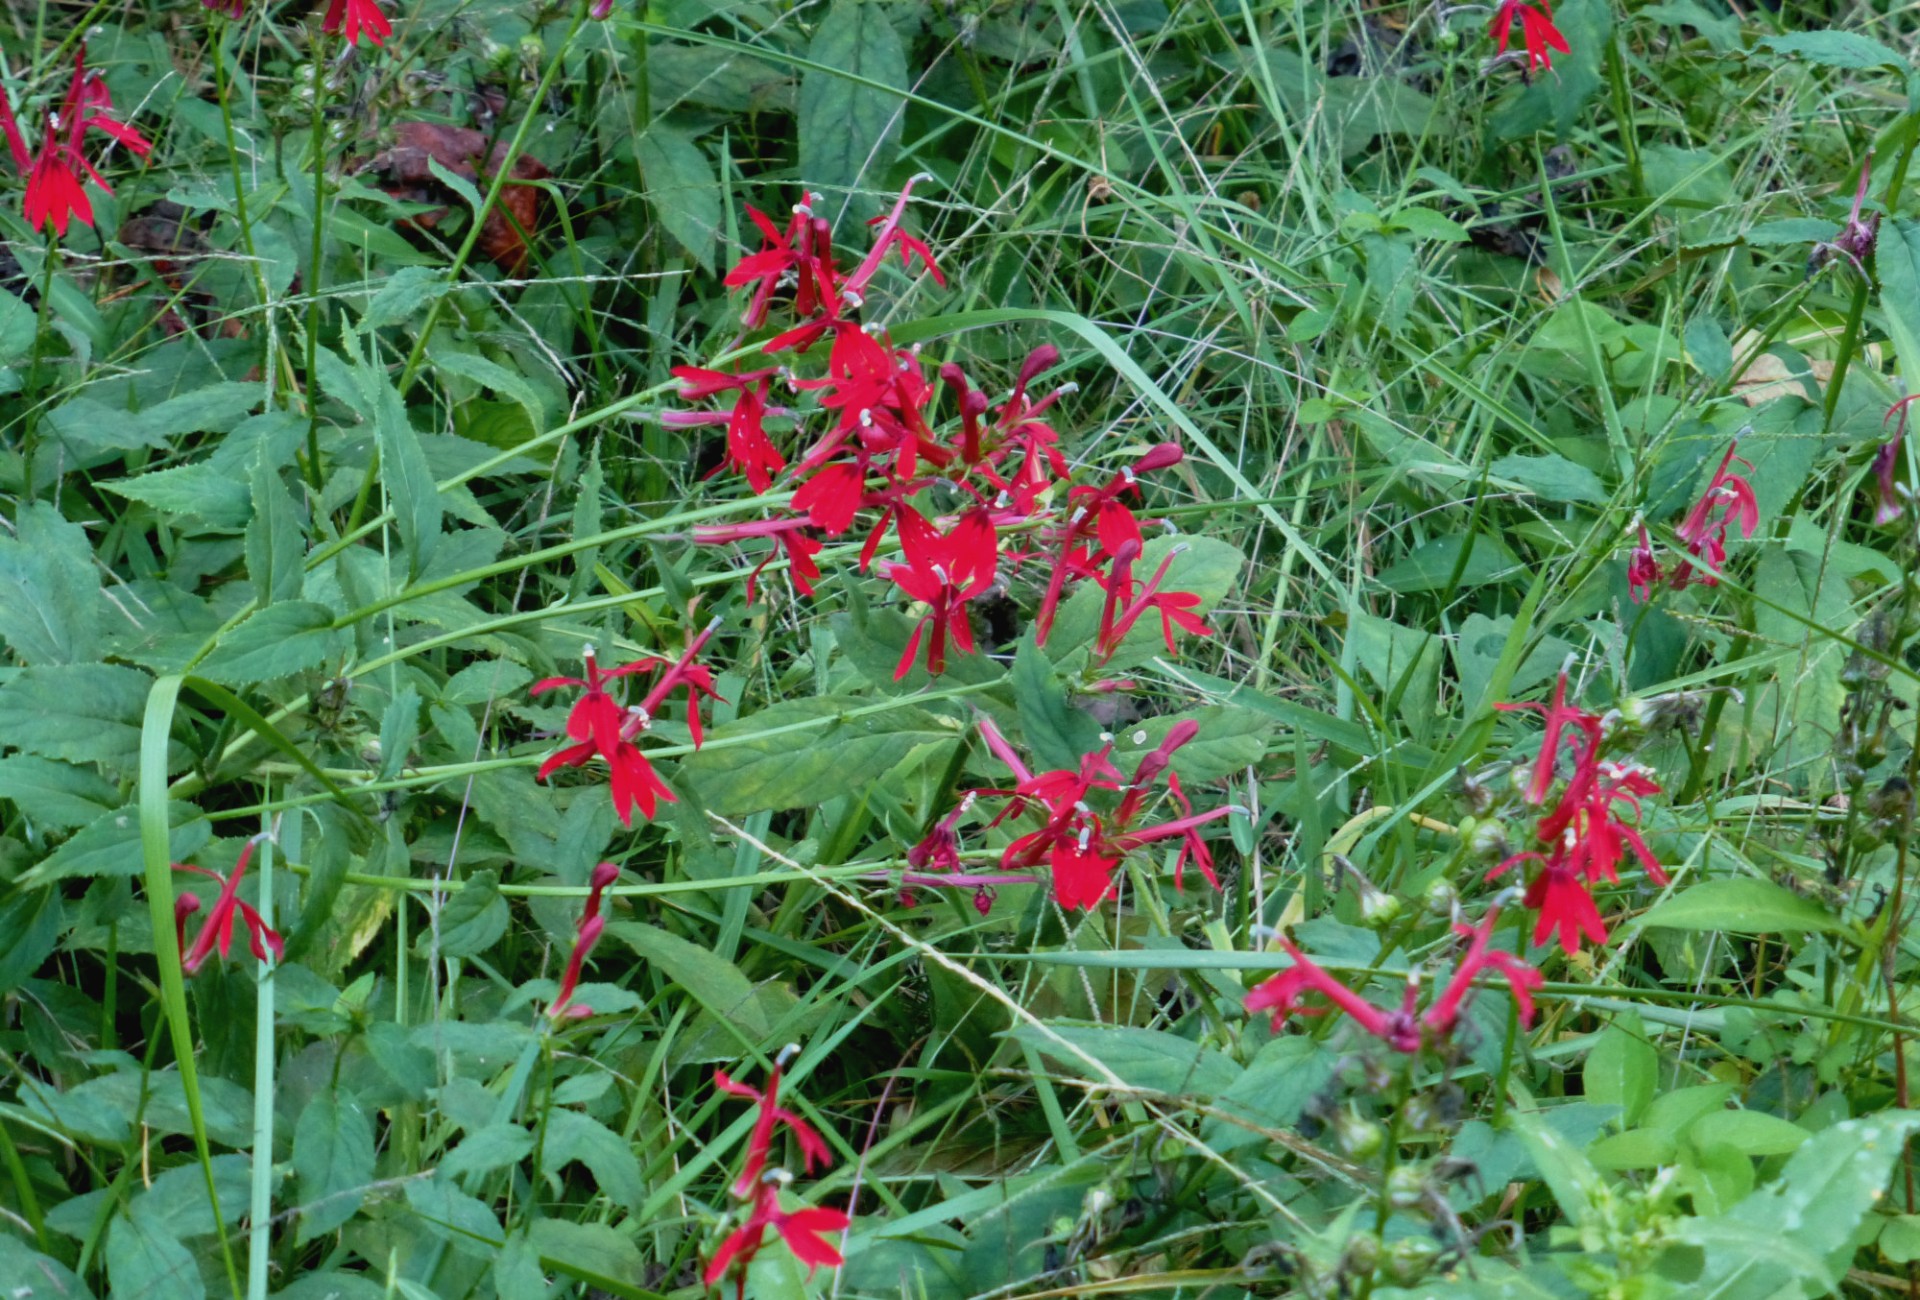 Brightly colored flowers in a field of other plants and shrubs